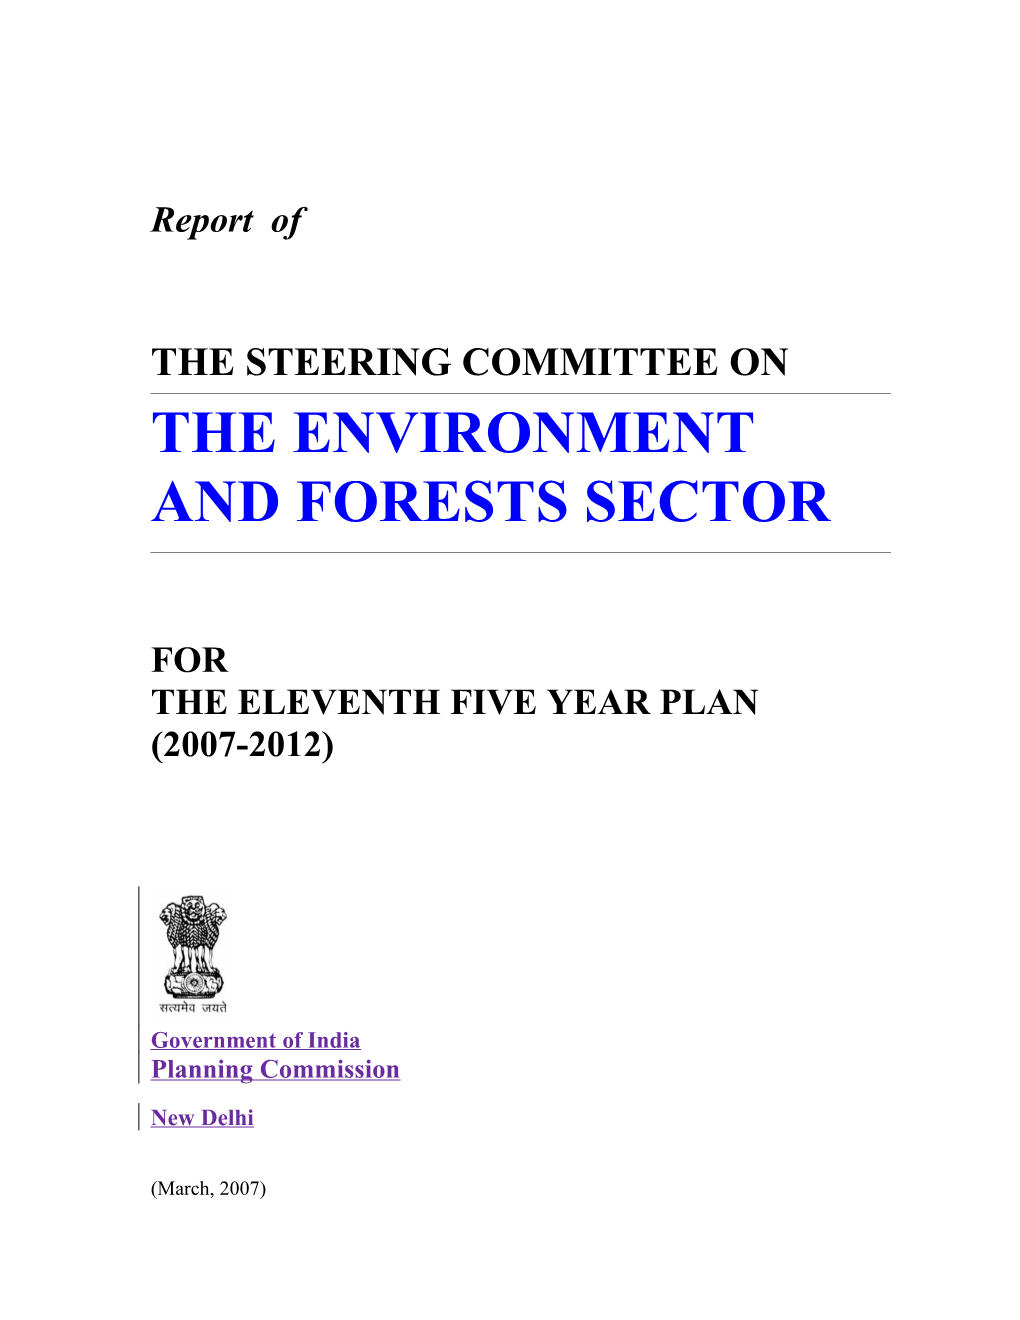 An Approach to the 11Th Five Year Plan for the Ministry of Environment and Forests